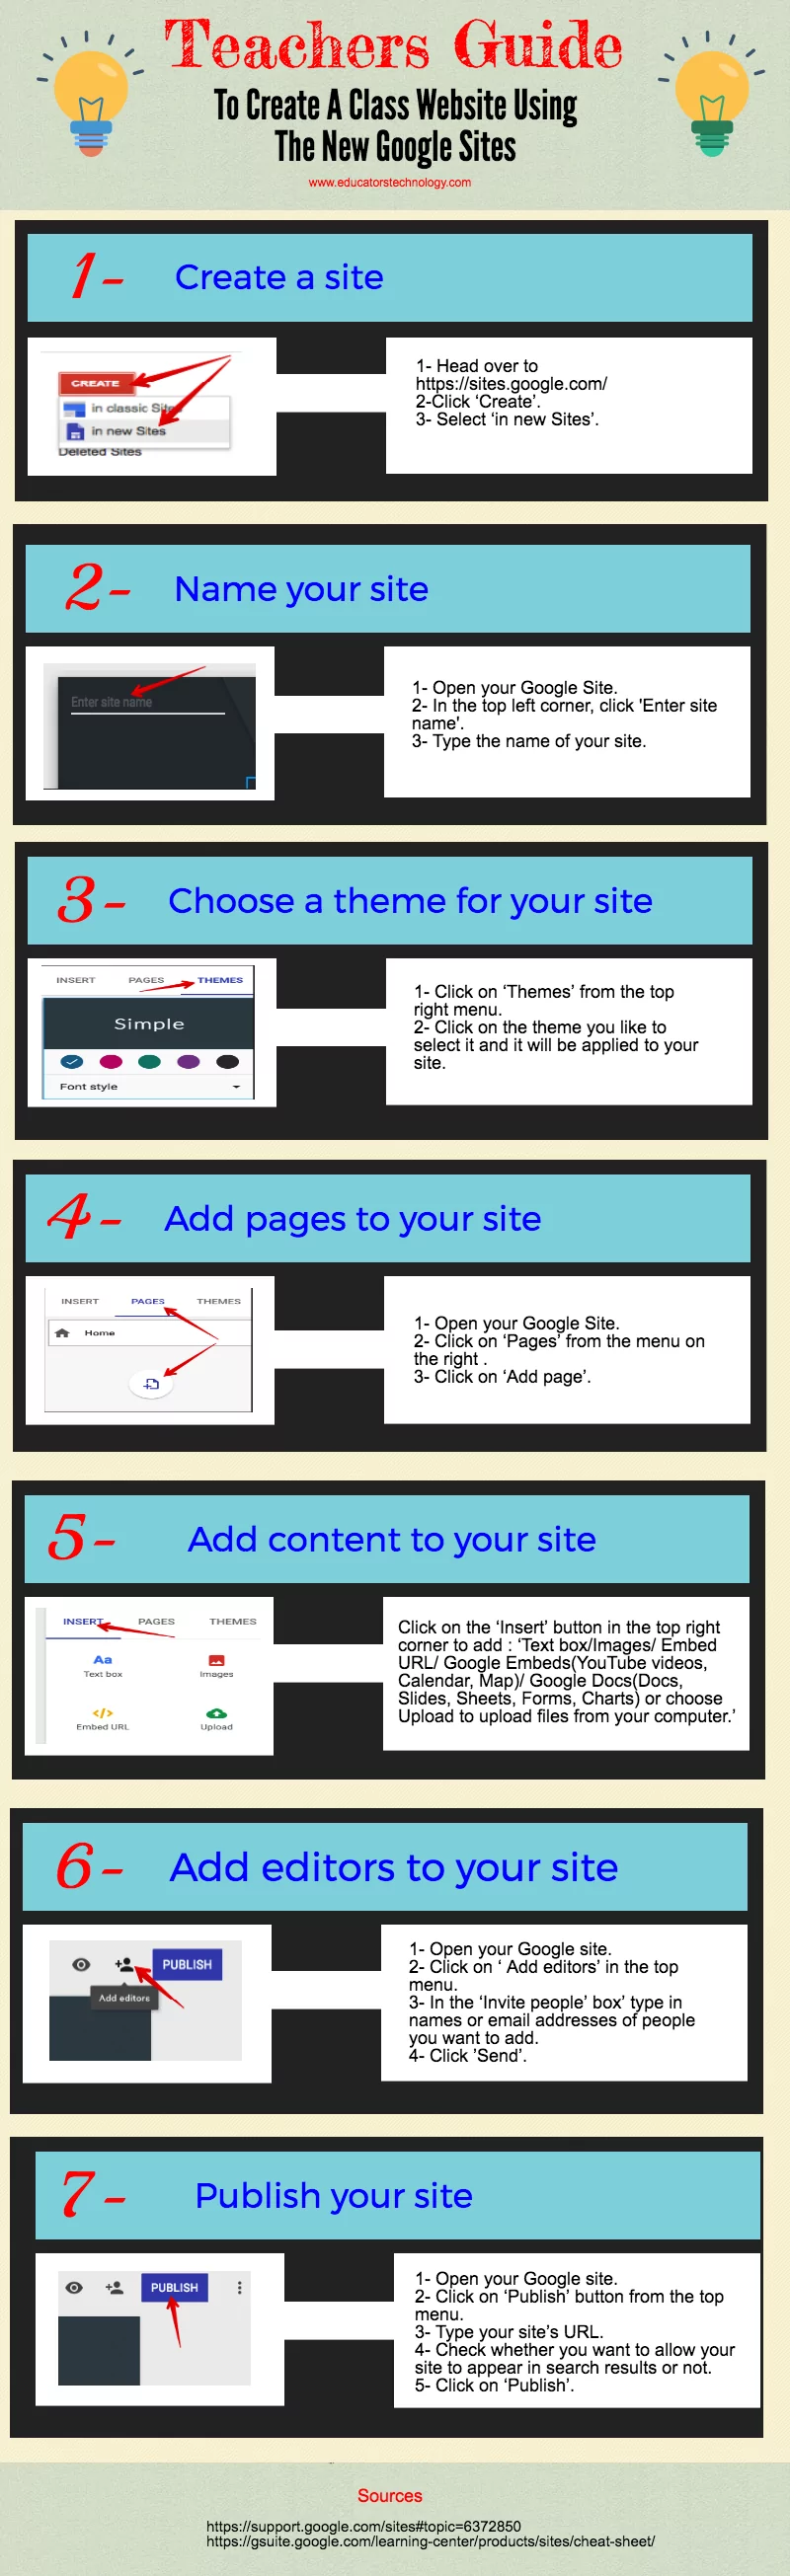 Teachers Guide to Creating A Class Website Using The New Google Sites